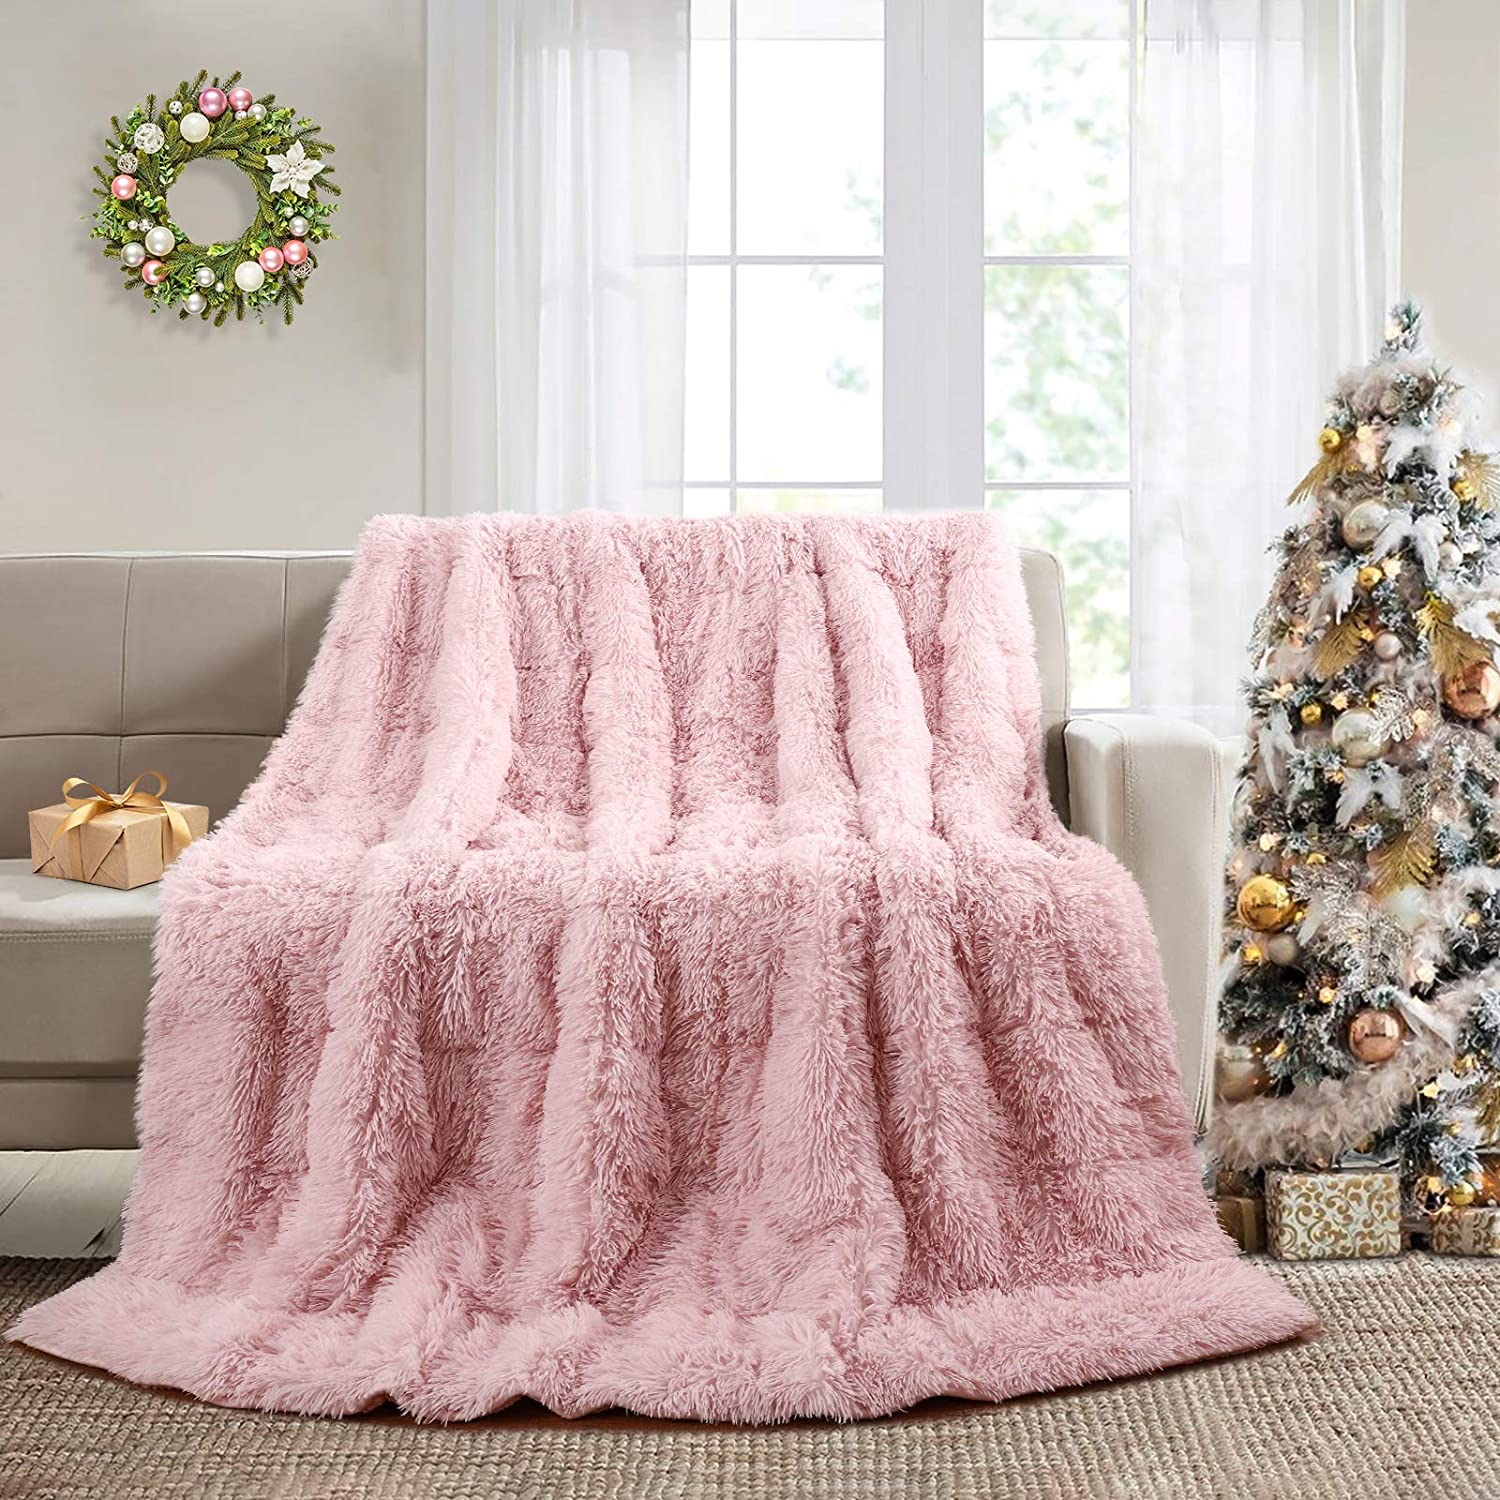 Ompaa Faux Fur Adults Weighted Blanket 20lbs for Queen Size Bed 60